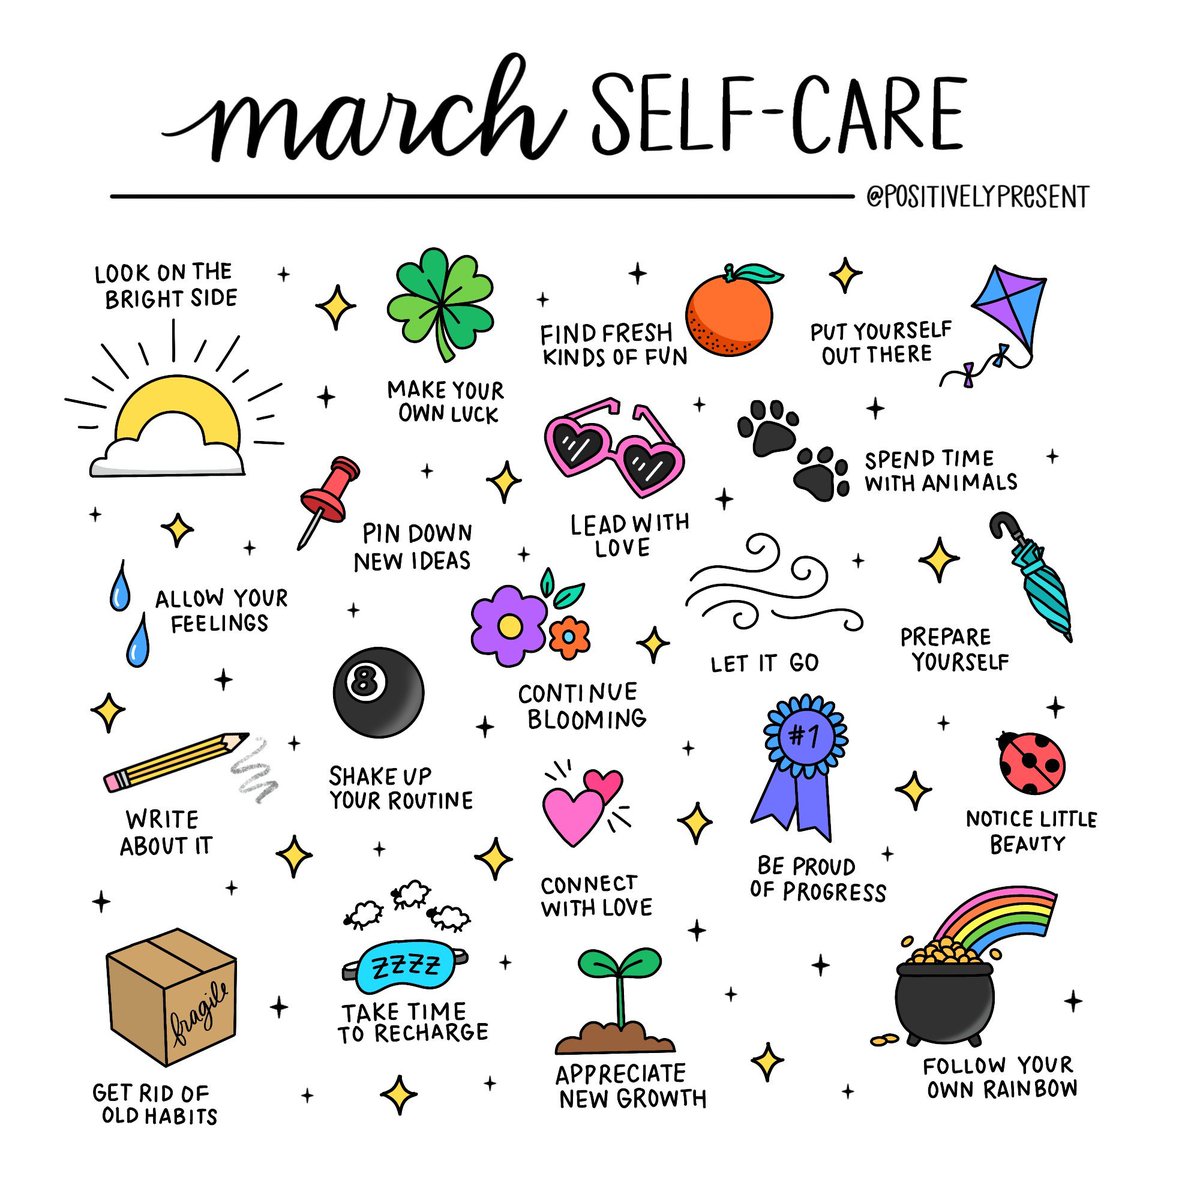 Self Care Sunday🌸
Brighter nights are coming, Daffodils are blooming, the smell of fresh cut grass - Spring is nearly here.

Make sure to give yourself some much needed self care this month with some ideas highlighted below of what you can do ❤️
#thrive #selfcaresundays